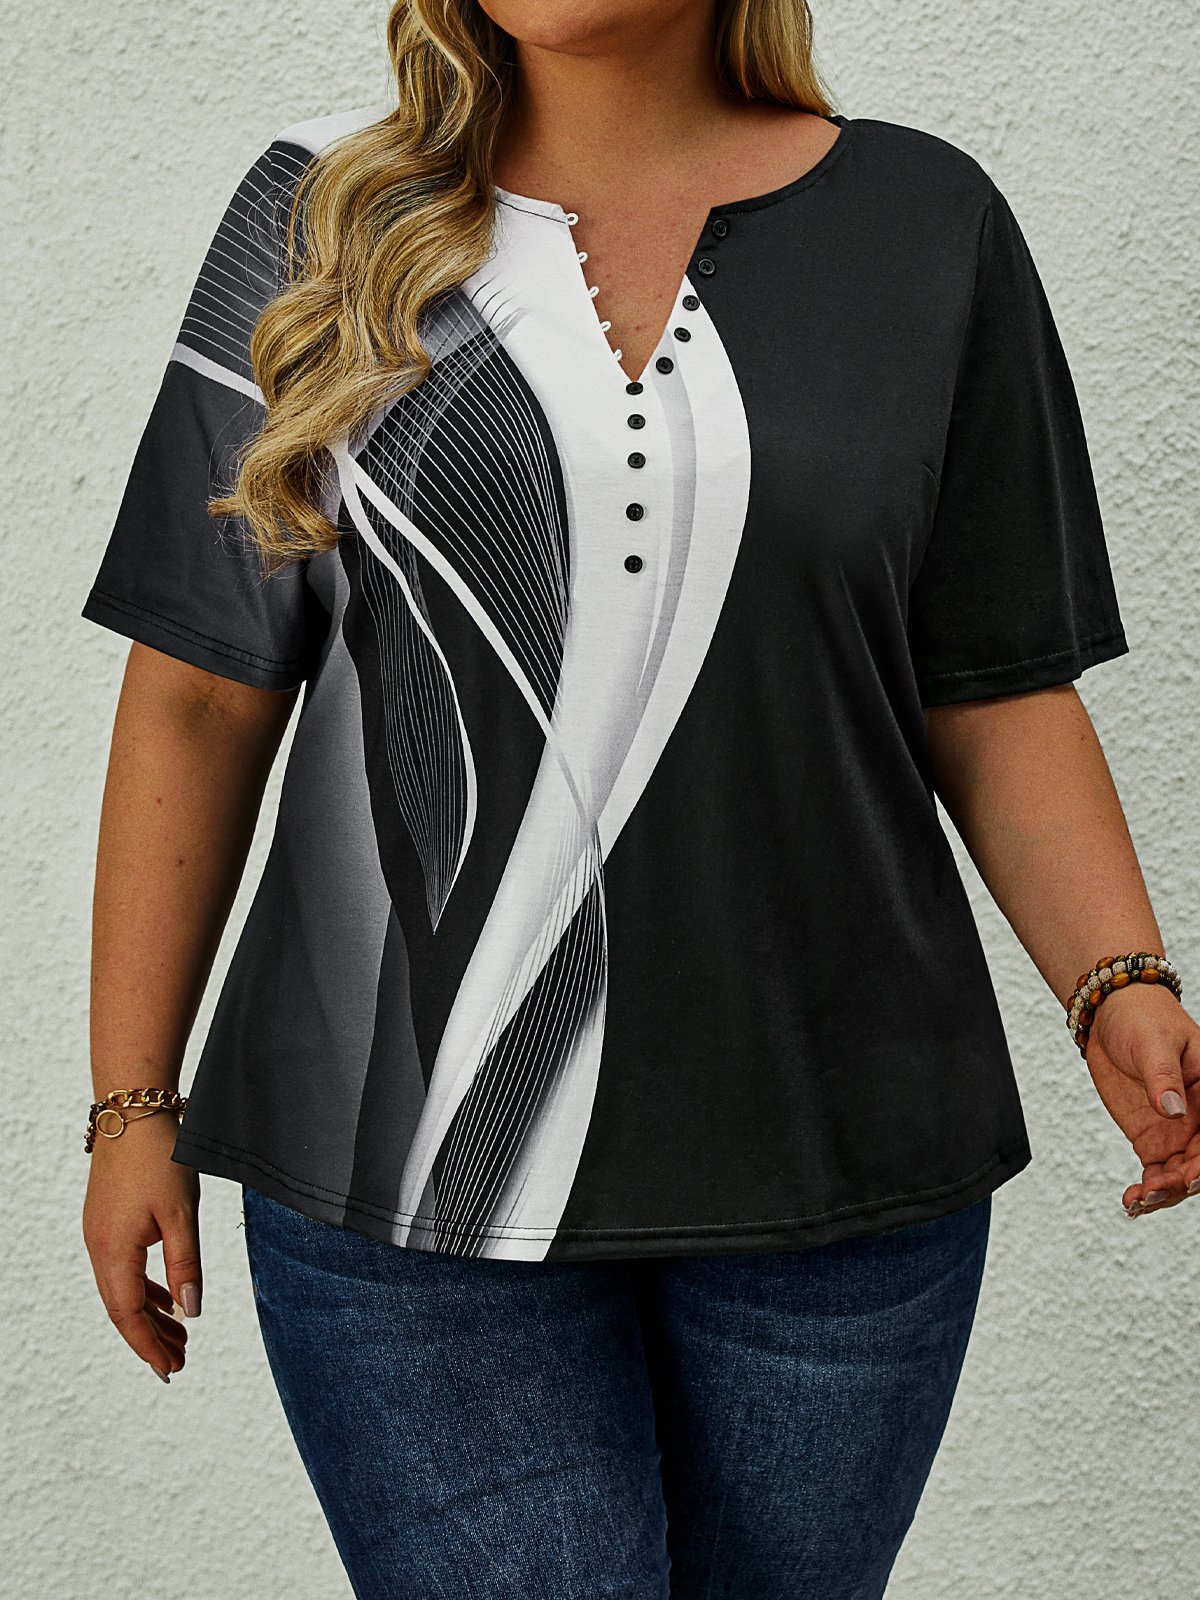 Plus Size Geometric Jersey Others Casual T-Shirt